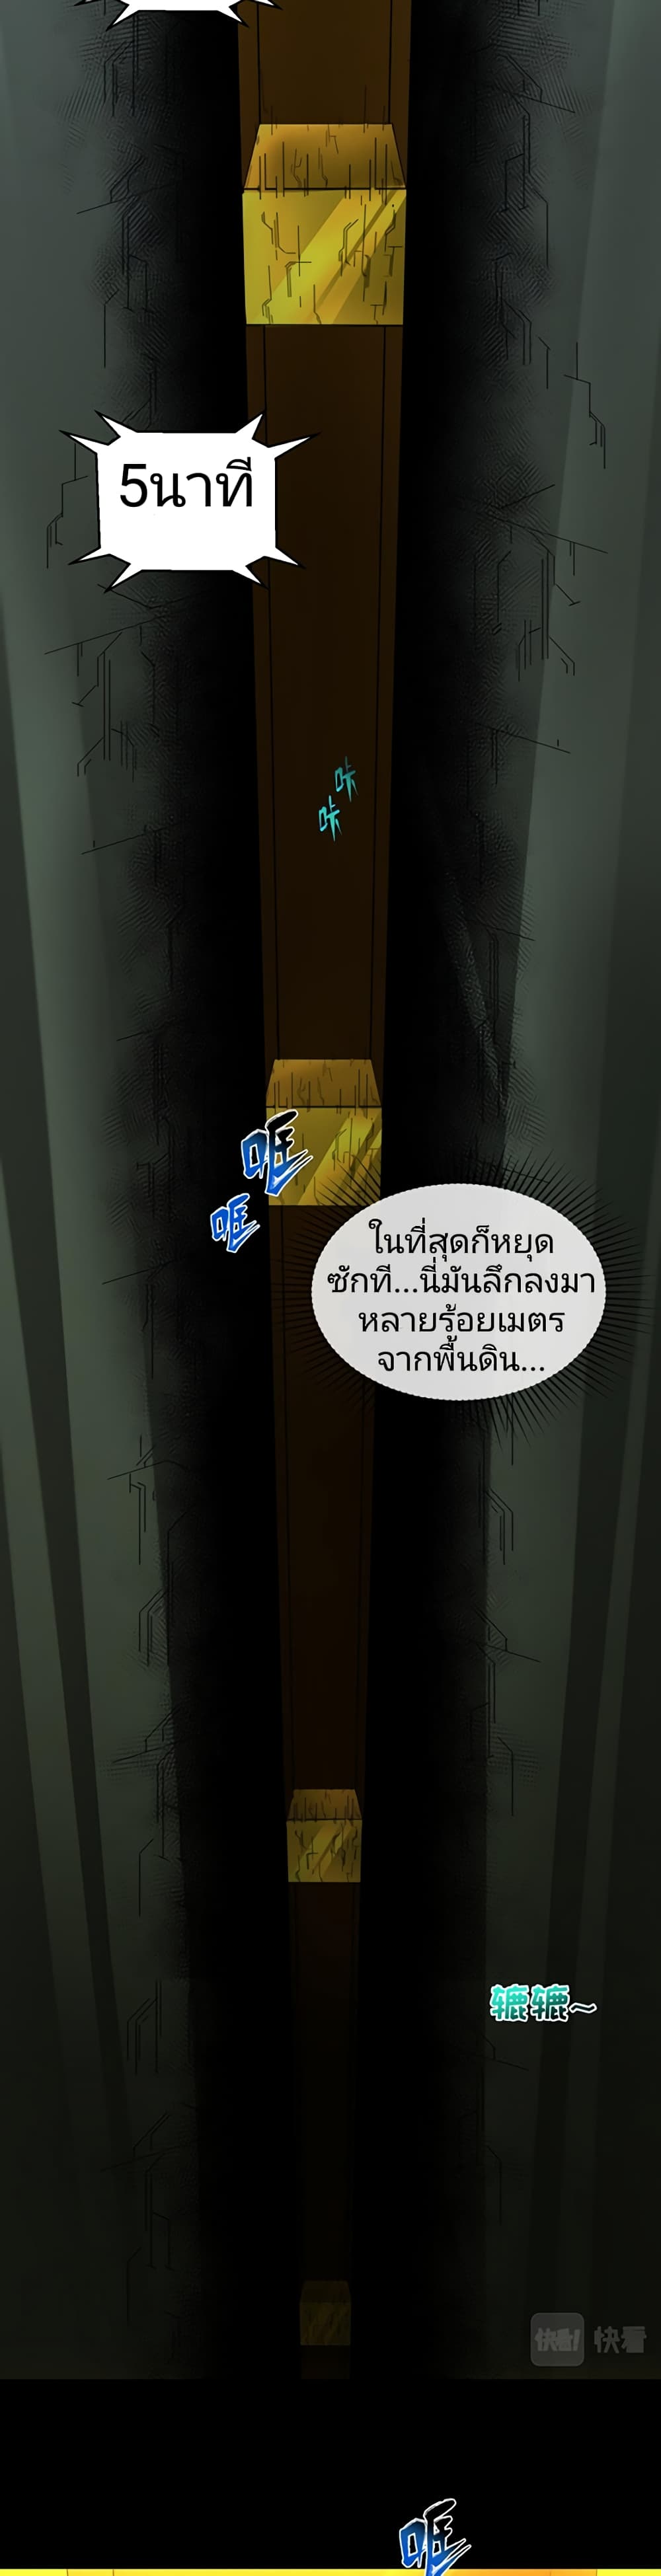 The Age of Ghost Spirits à¸à¸­à¸à¸à¸µà¹ 39 (34)